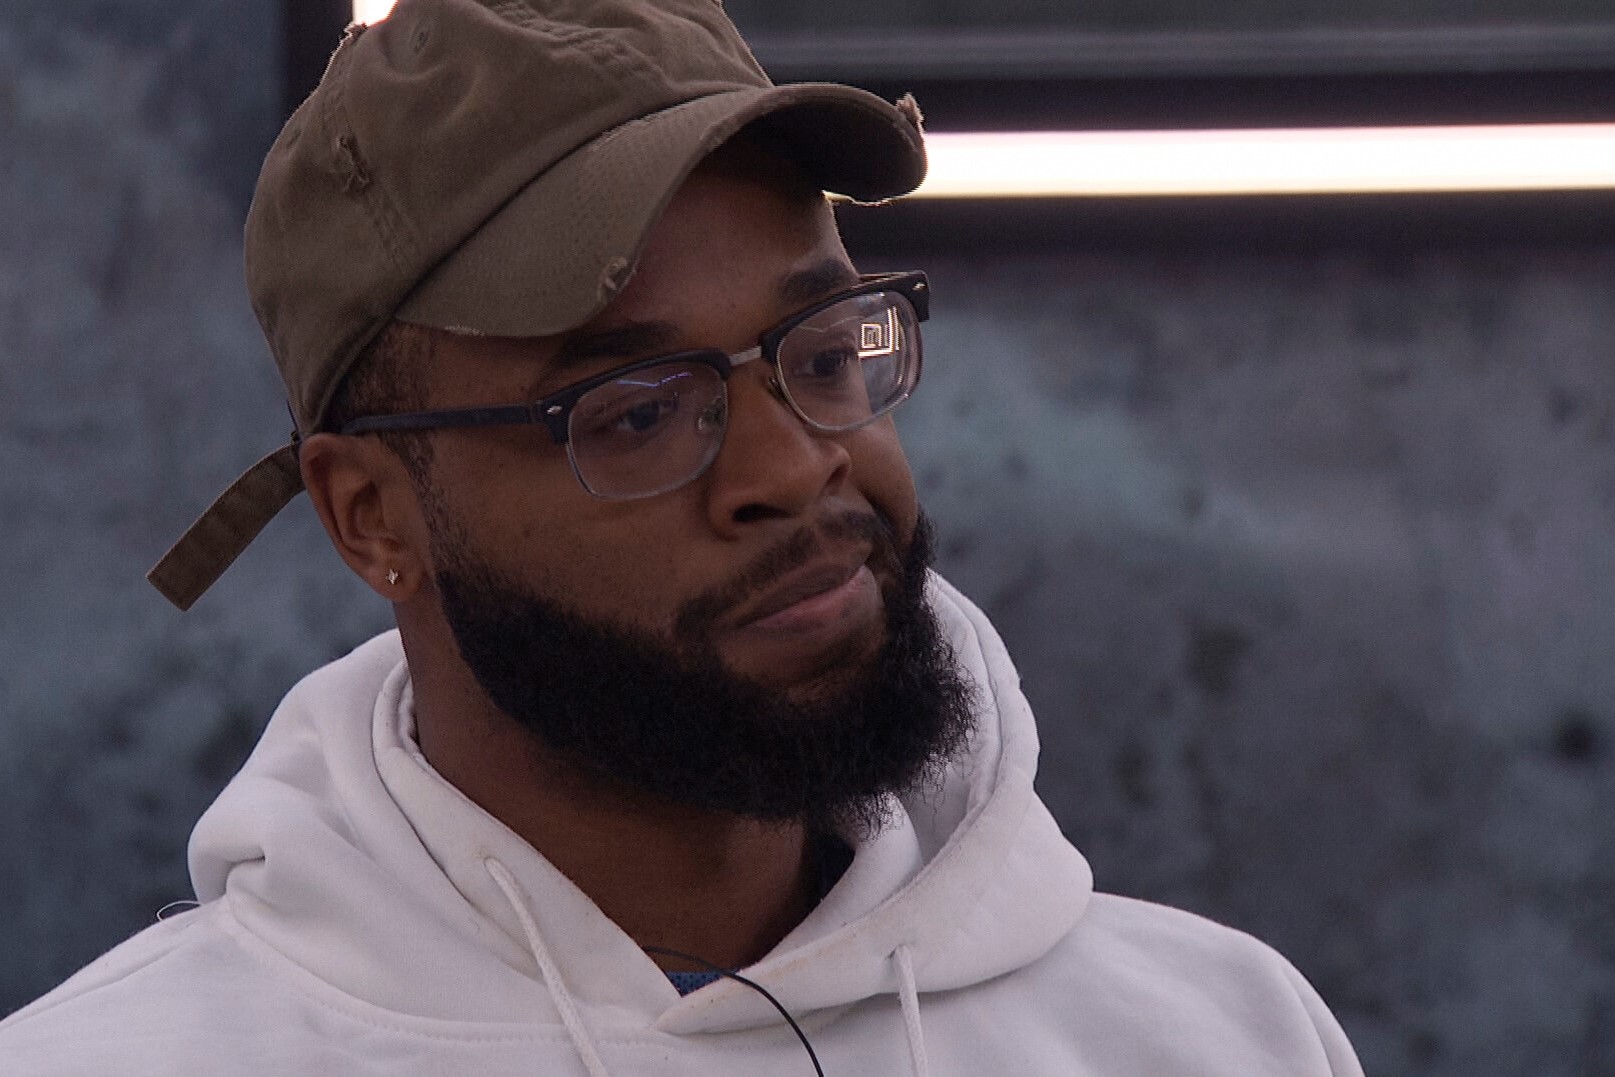 Monte Taylor, who wants to target Michael Bruner next in 'Big Brother 24' on CBS, wears a brown baseball cap, white hoodie, and glasses.